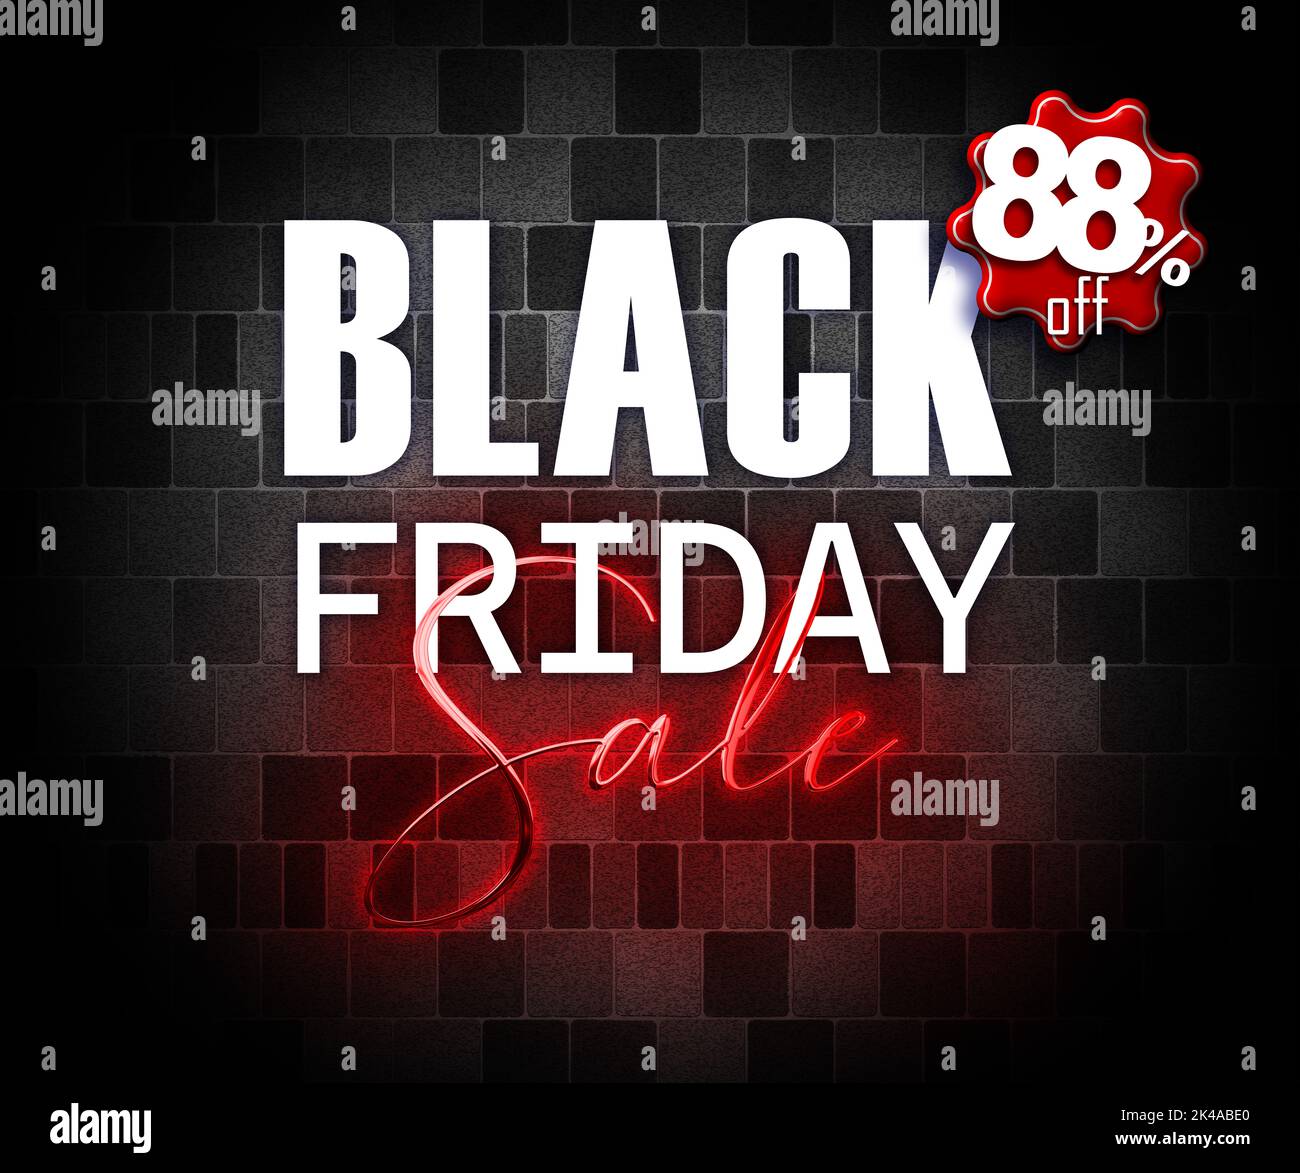 illustration with 3d elements black friday promotion banner 88 percent off sales increase Stock Photo